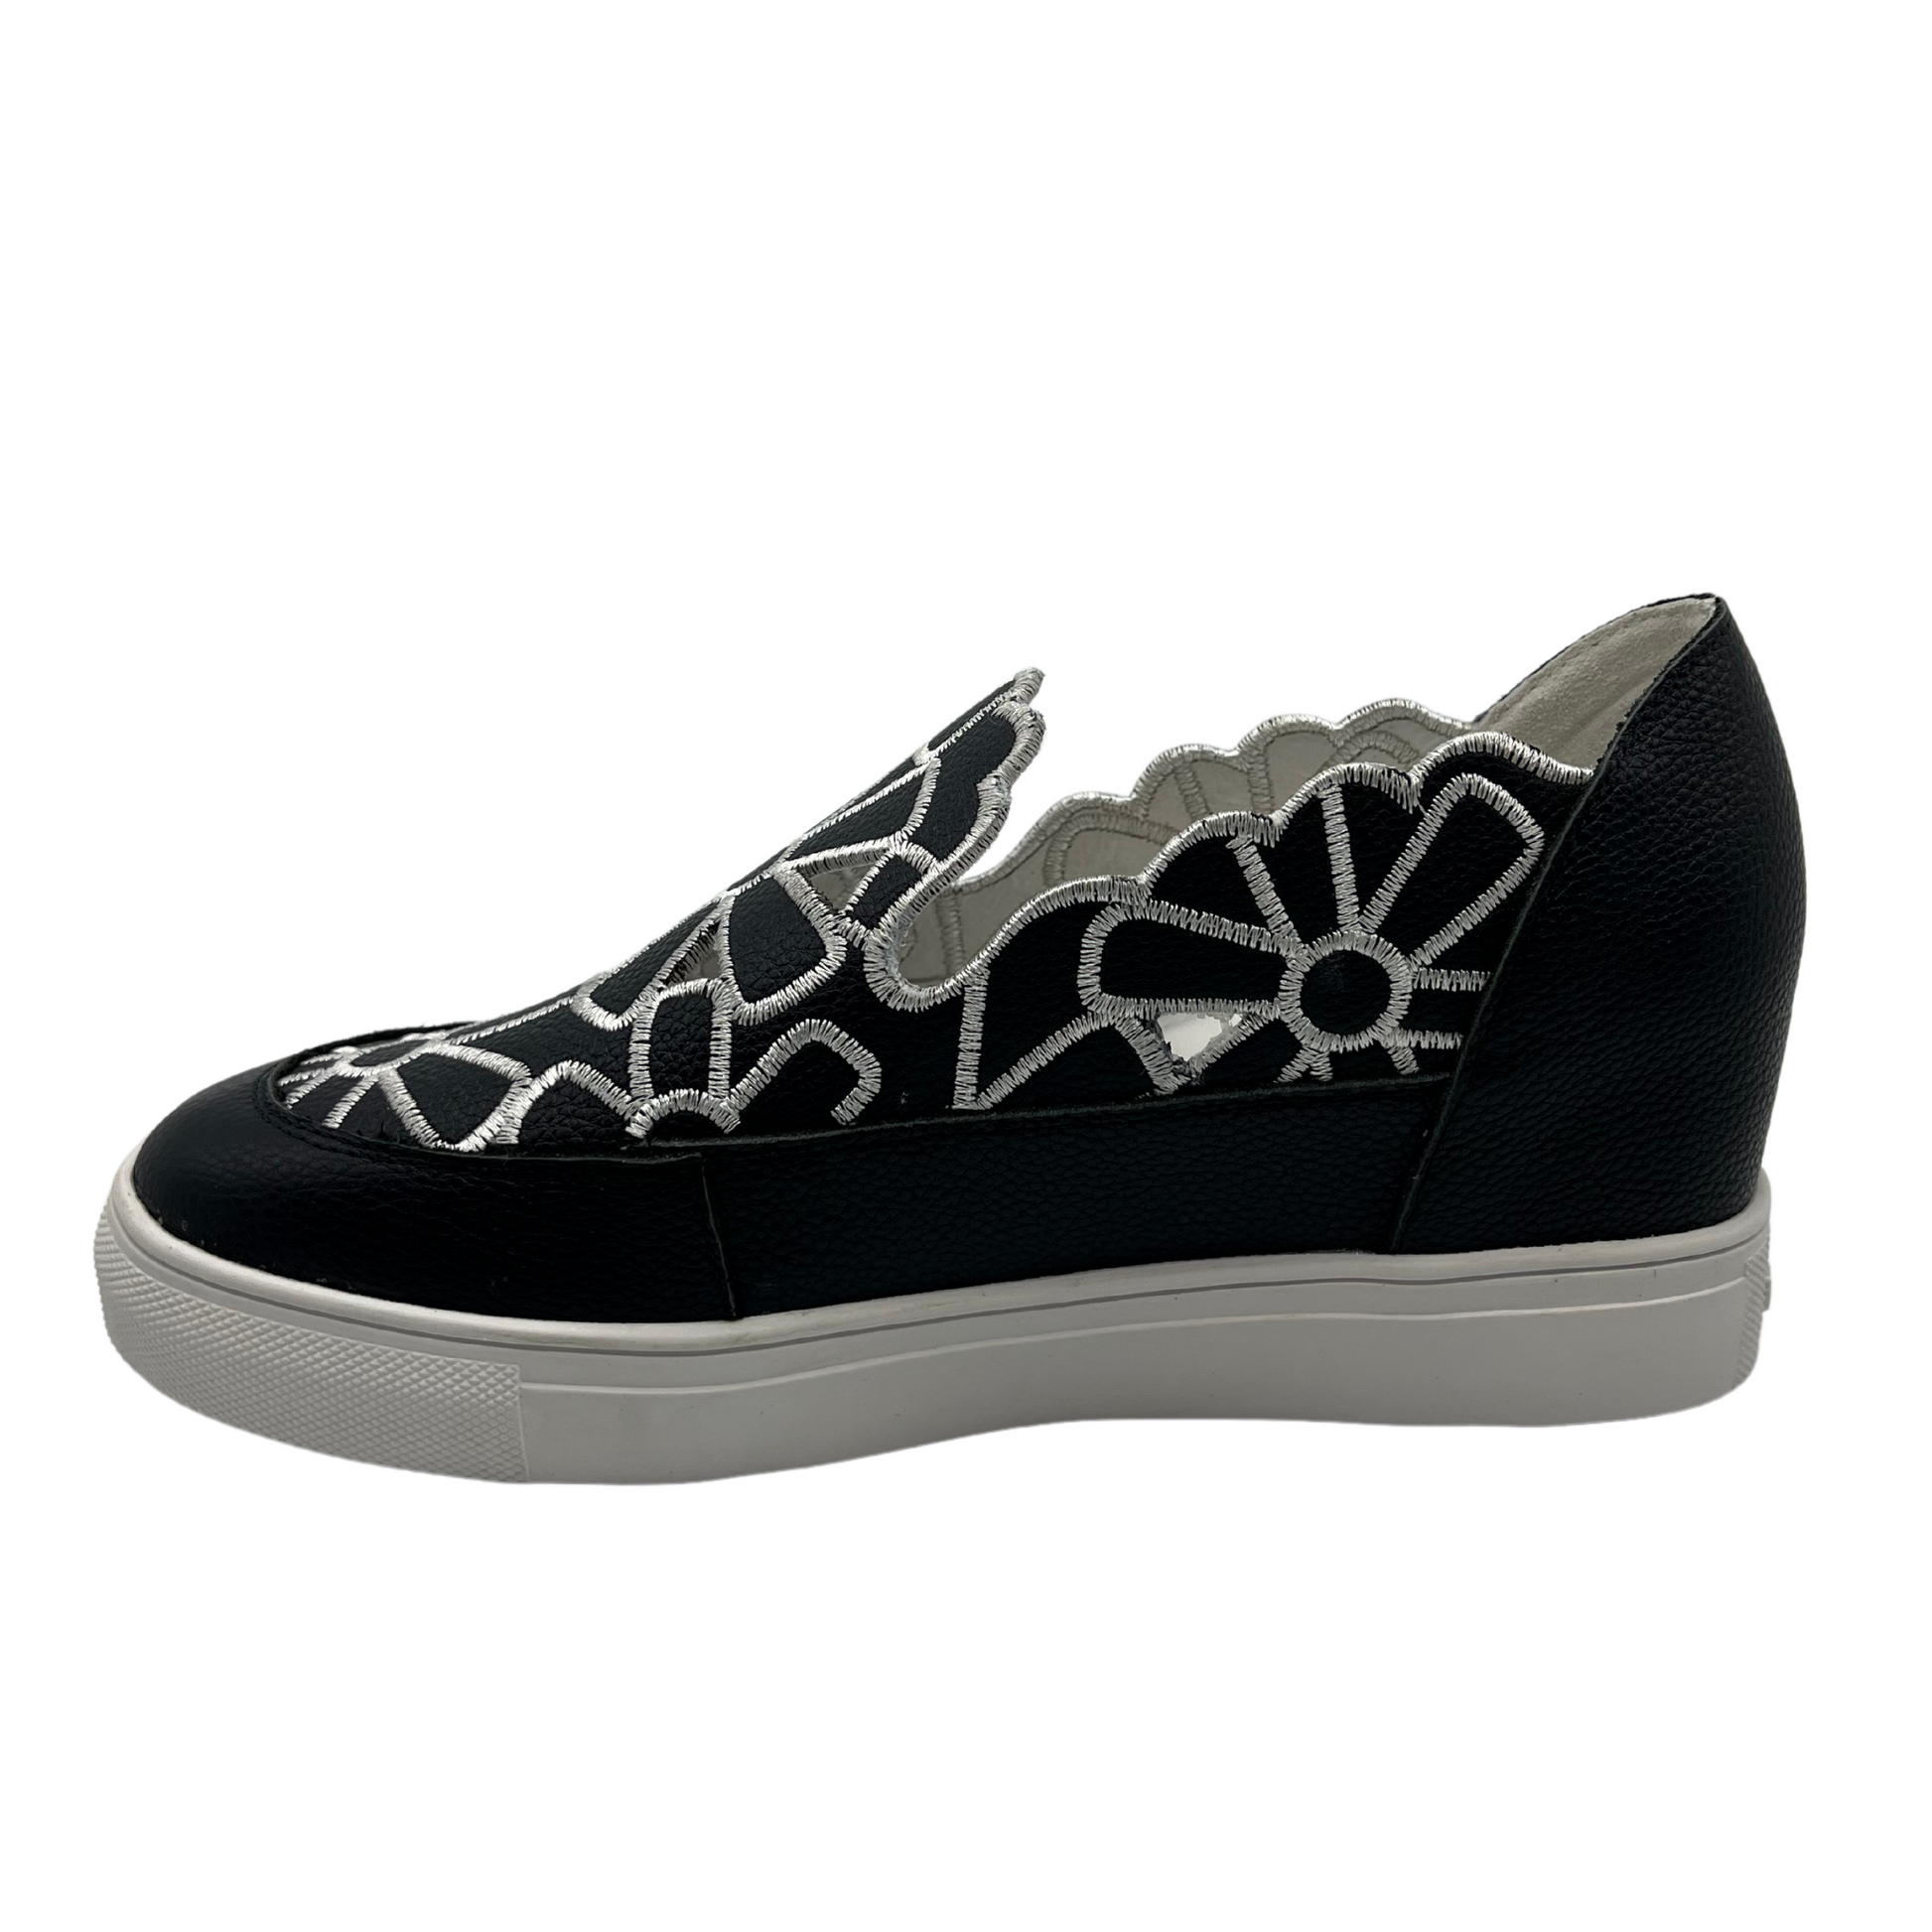 Left facing view of leather wedge sneaker with hidden wedge, cut out and embroidered upper and white rubber outsole.